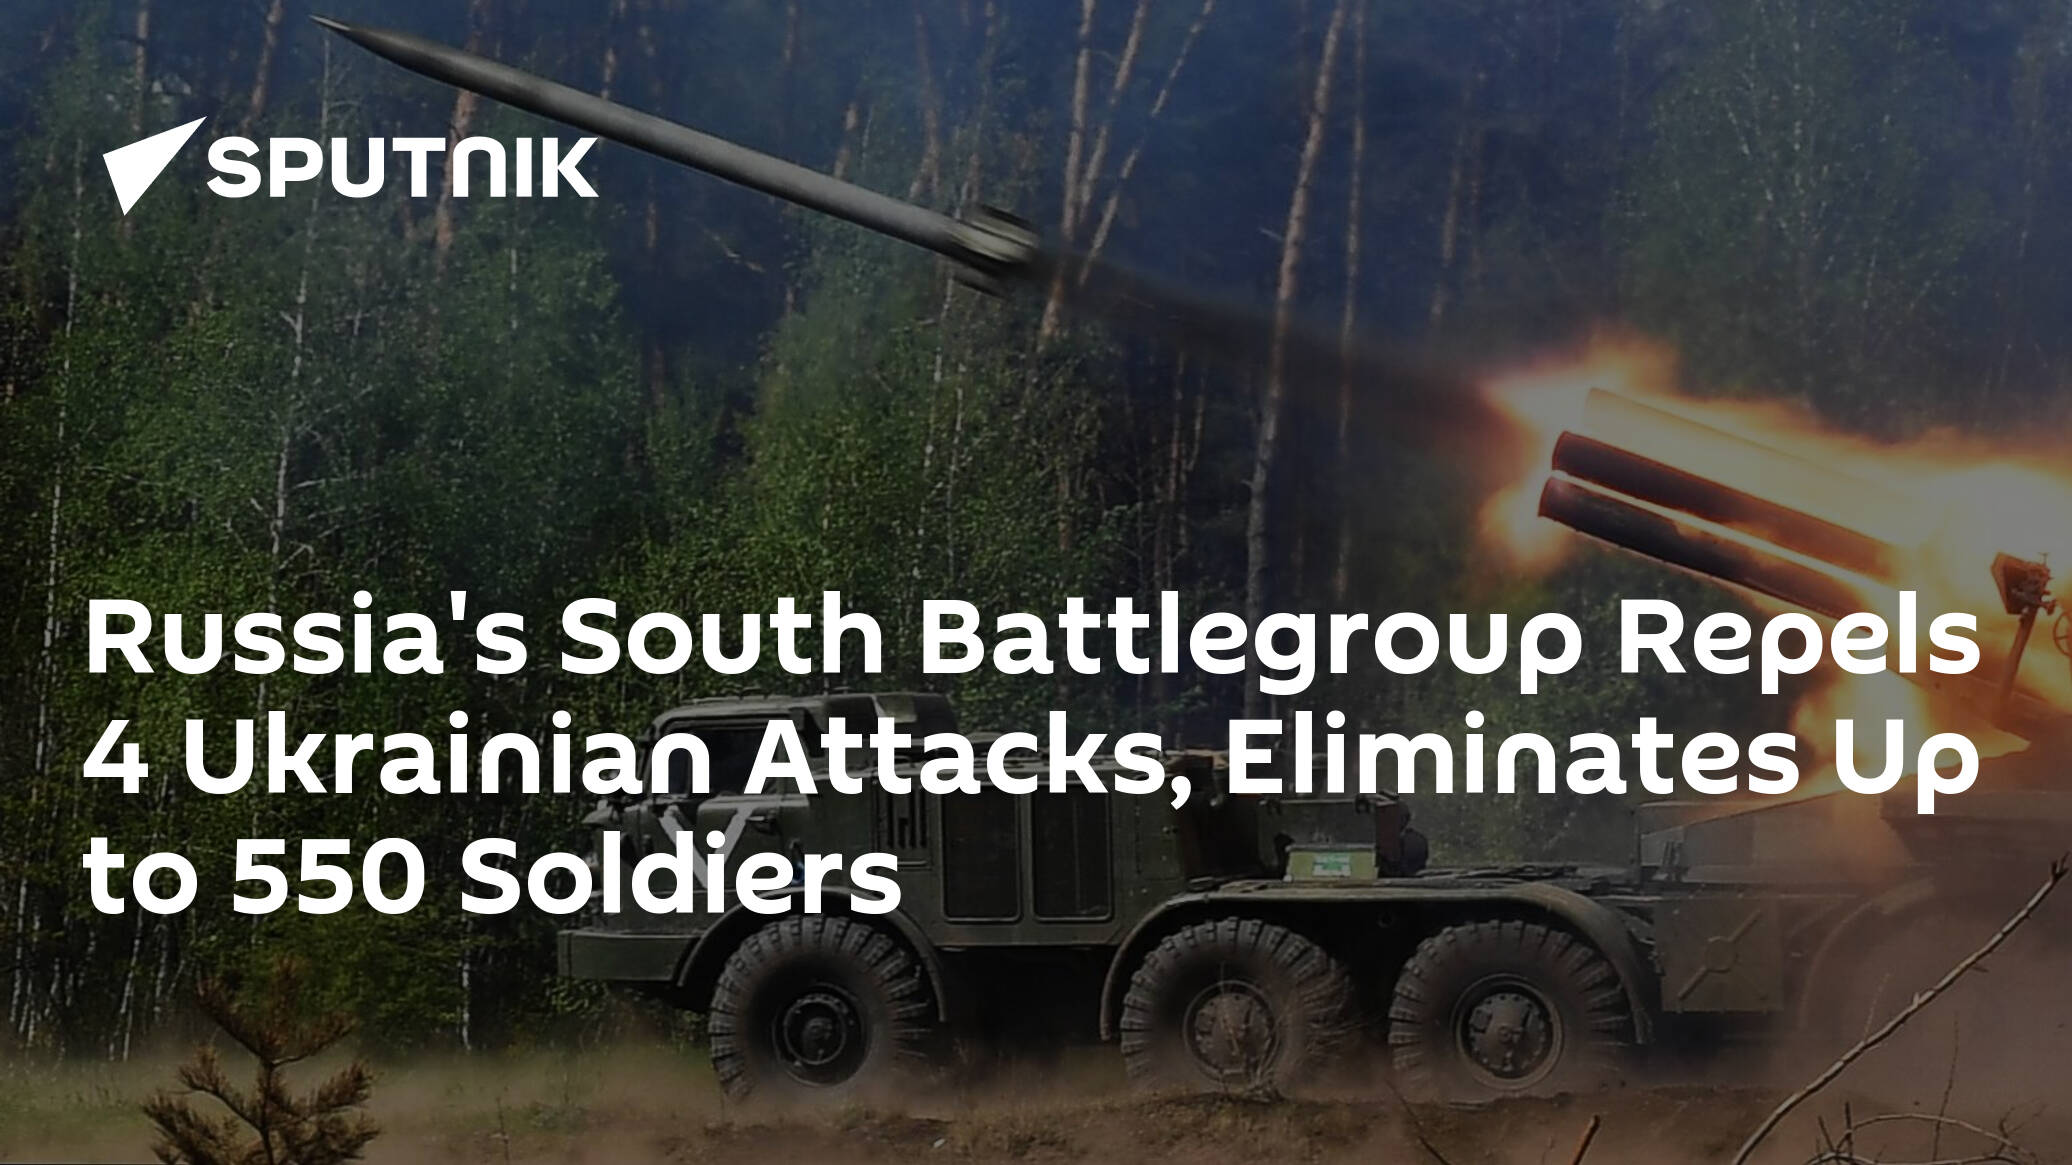 Russia's South Battlegroup Repels 4 Ukrainian Attacks, Eliminates Up to 550 Soldiers